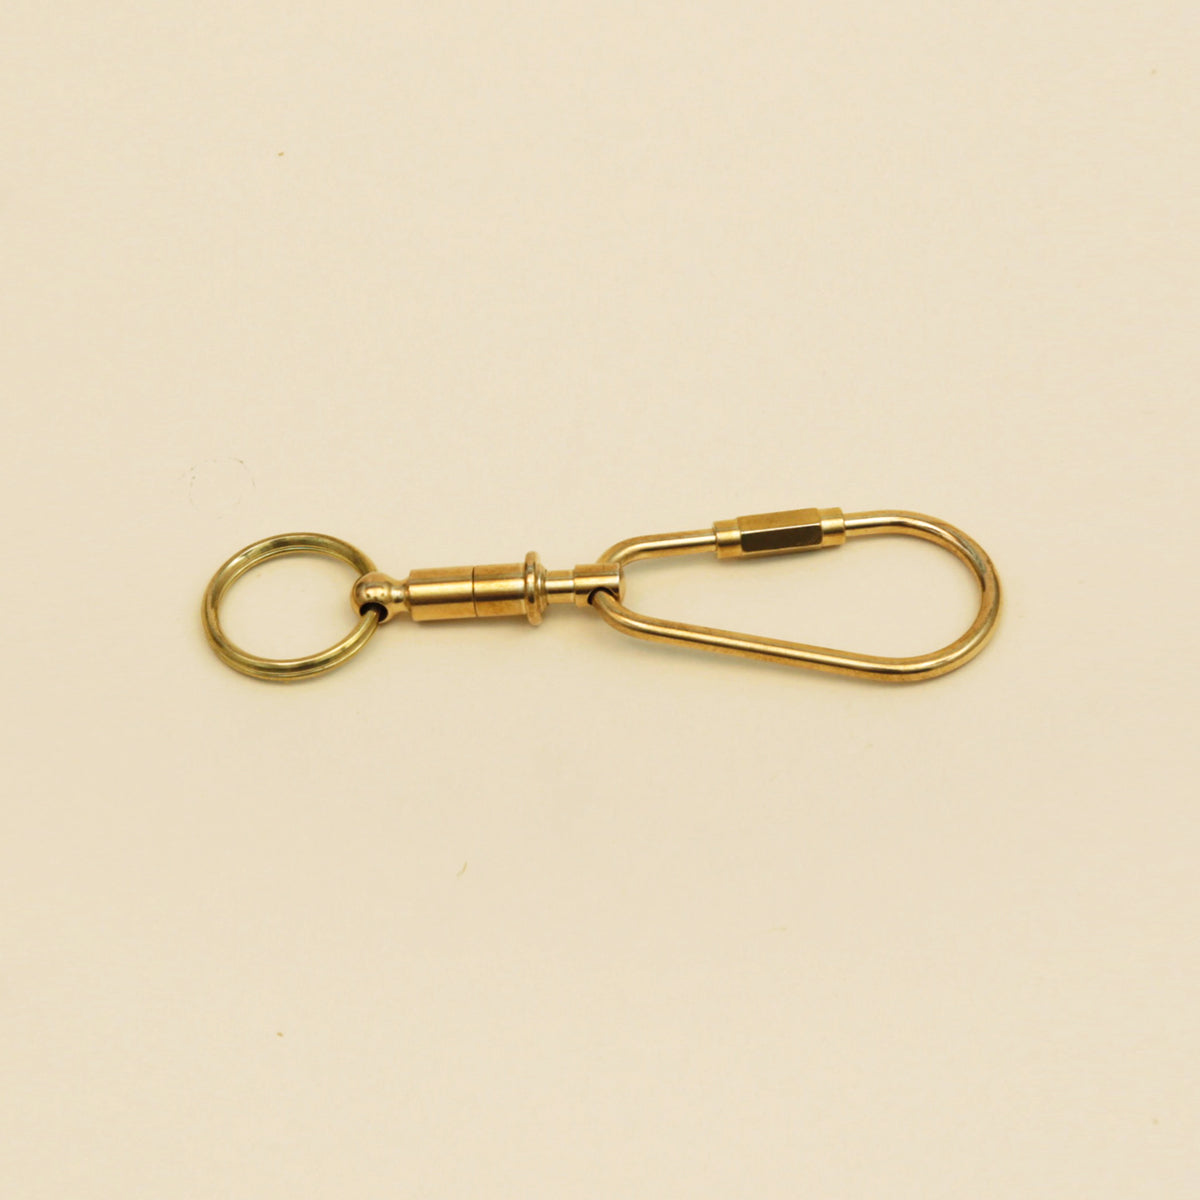 Releasable Brass Key Ring